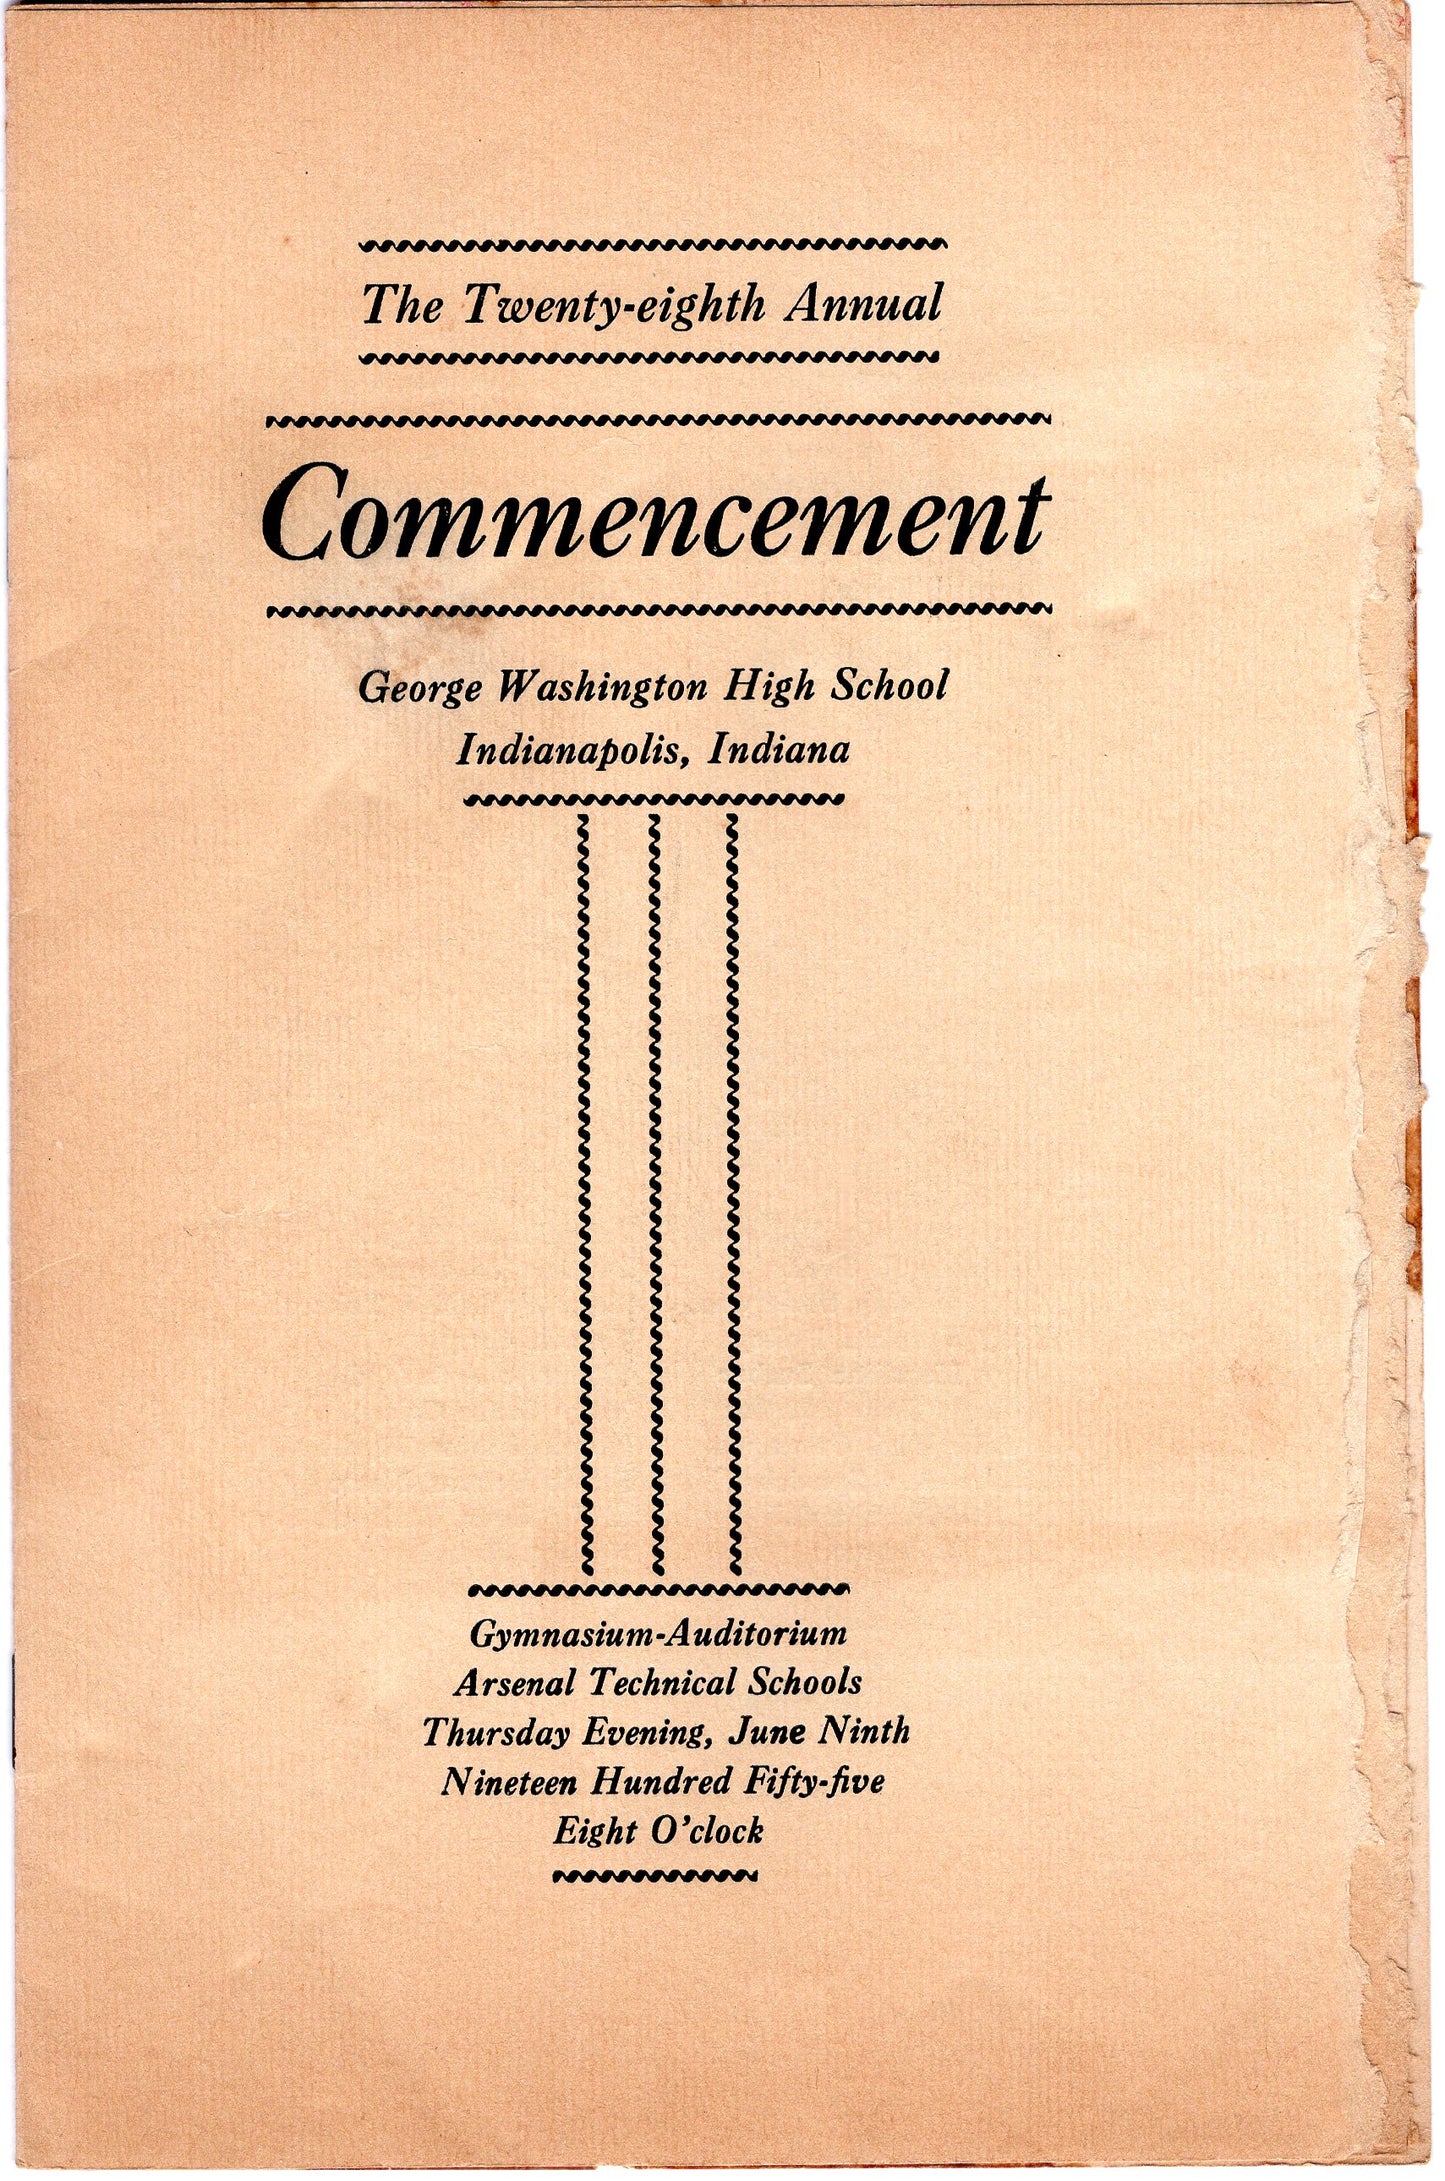 19 Pieces of Graduation 1955 Marion County Indiana Memories OG47